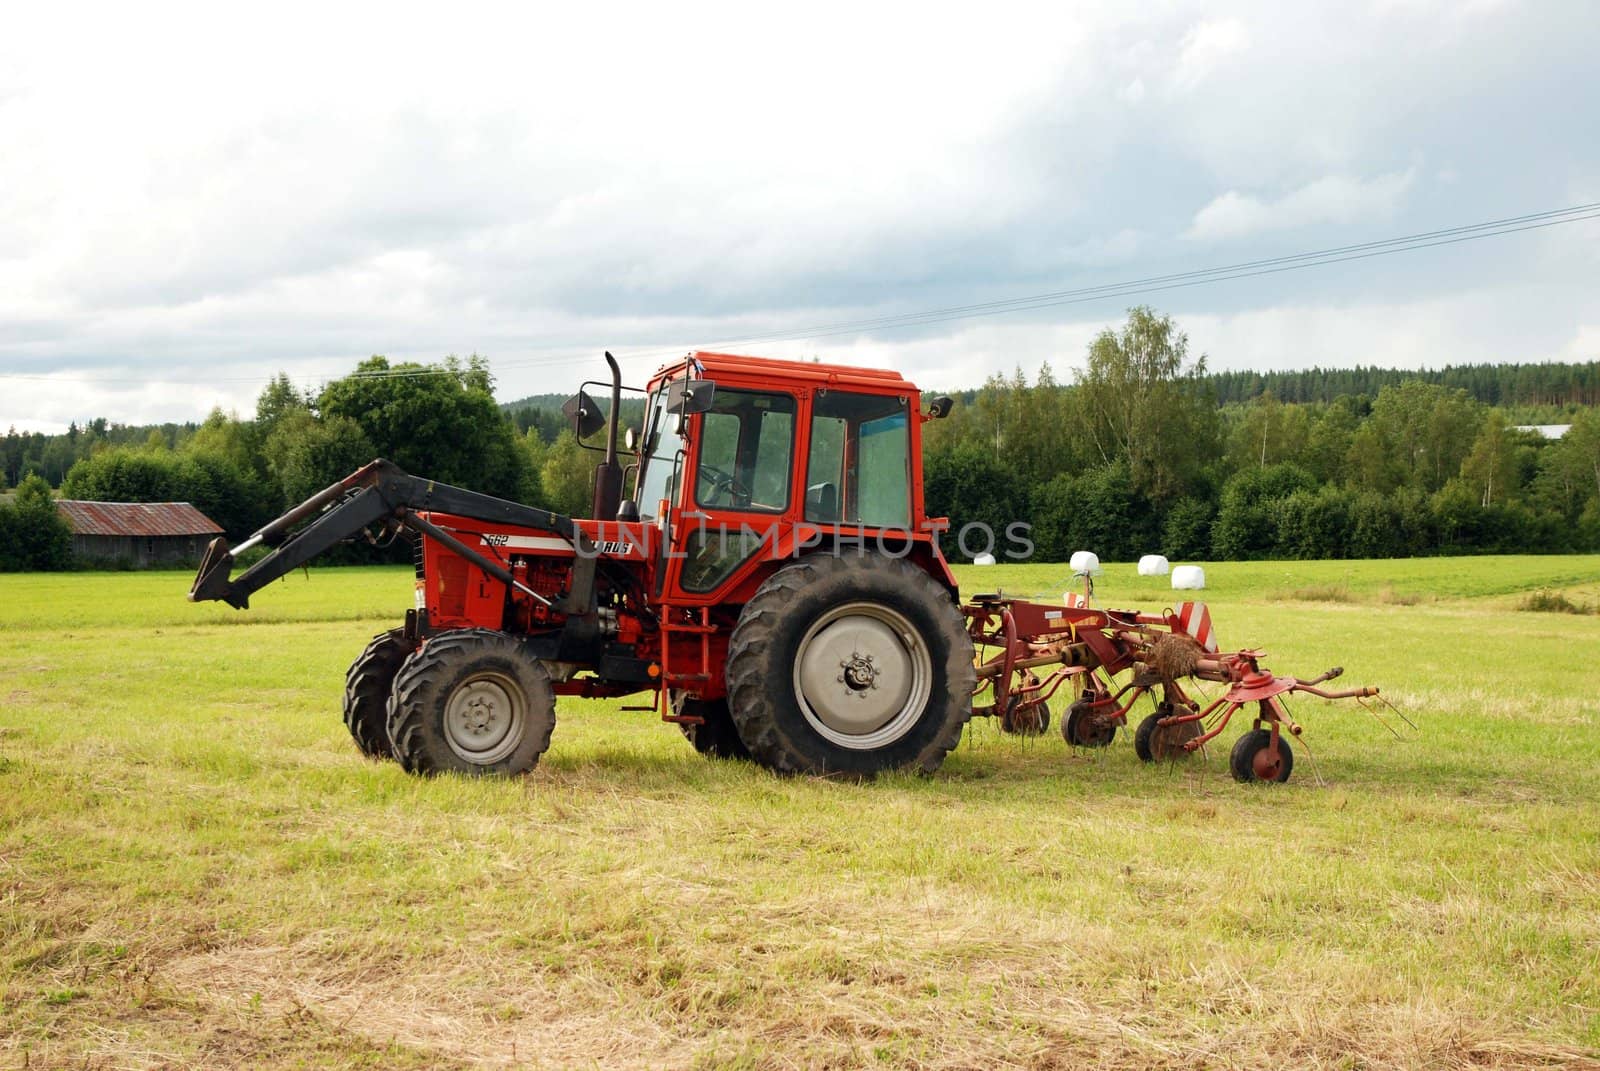 A red agricultural machinery